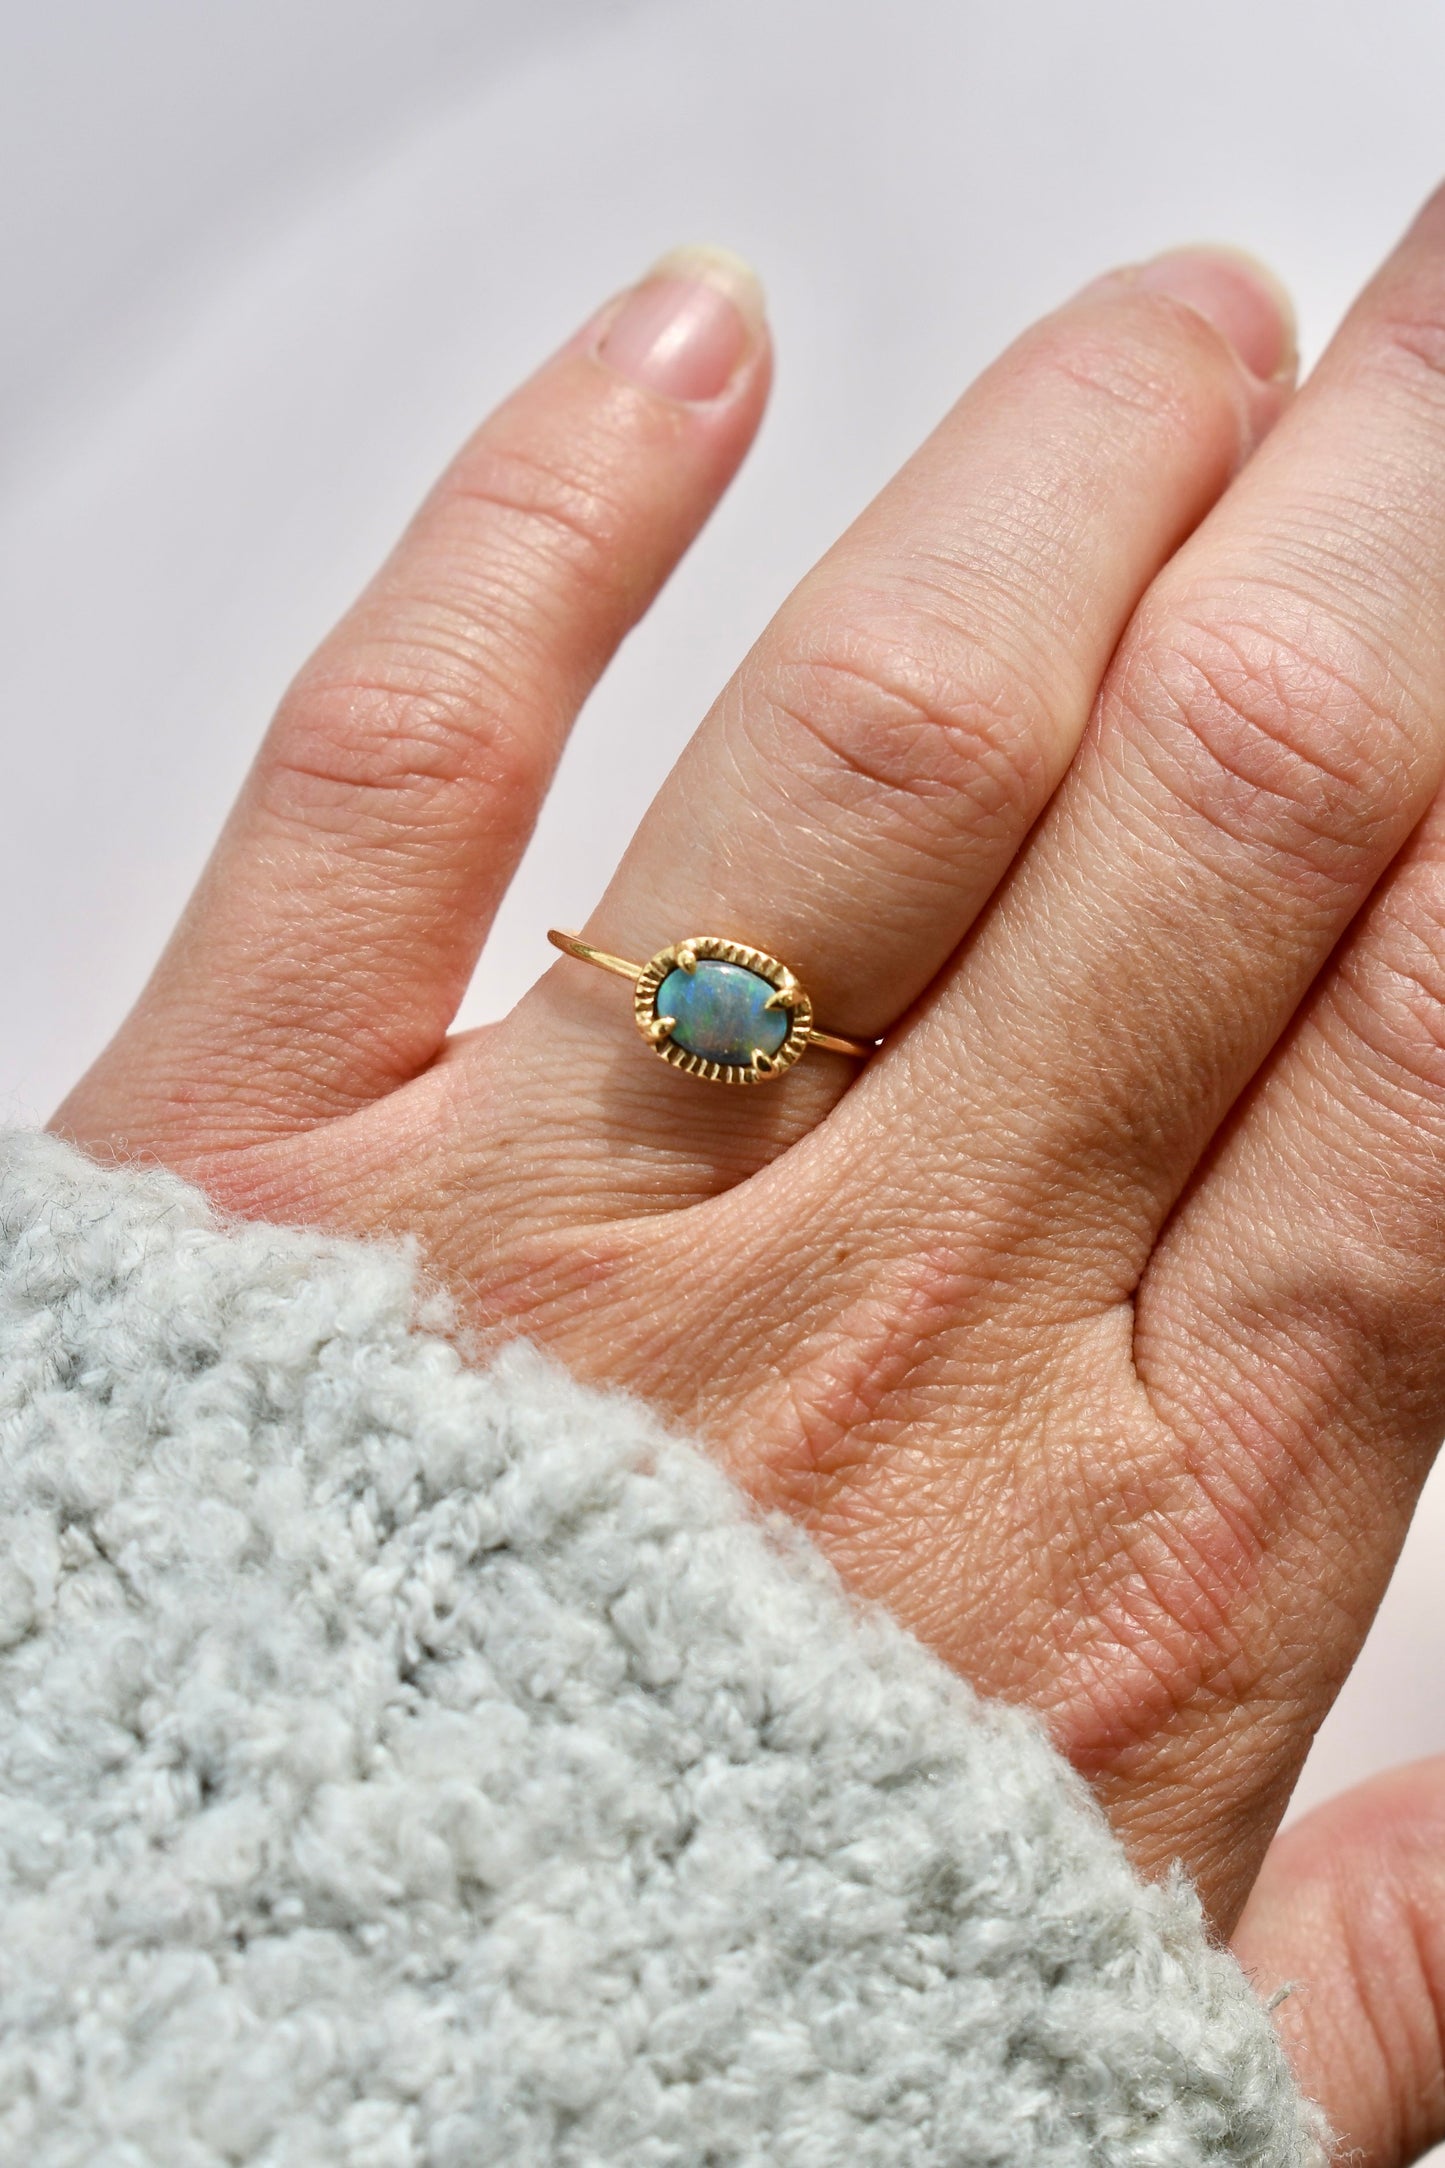 Made by hand in Northern New Mexico using recycled metals and responsibly sourced stones, this timeless, heirloom piece is sure to make a statement. This ring features a 14kt yellow gold 1 mm band with an Australian boulder opal.